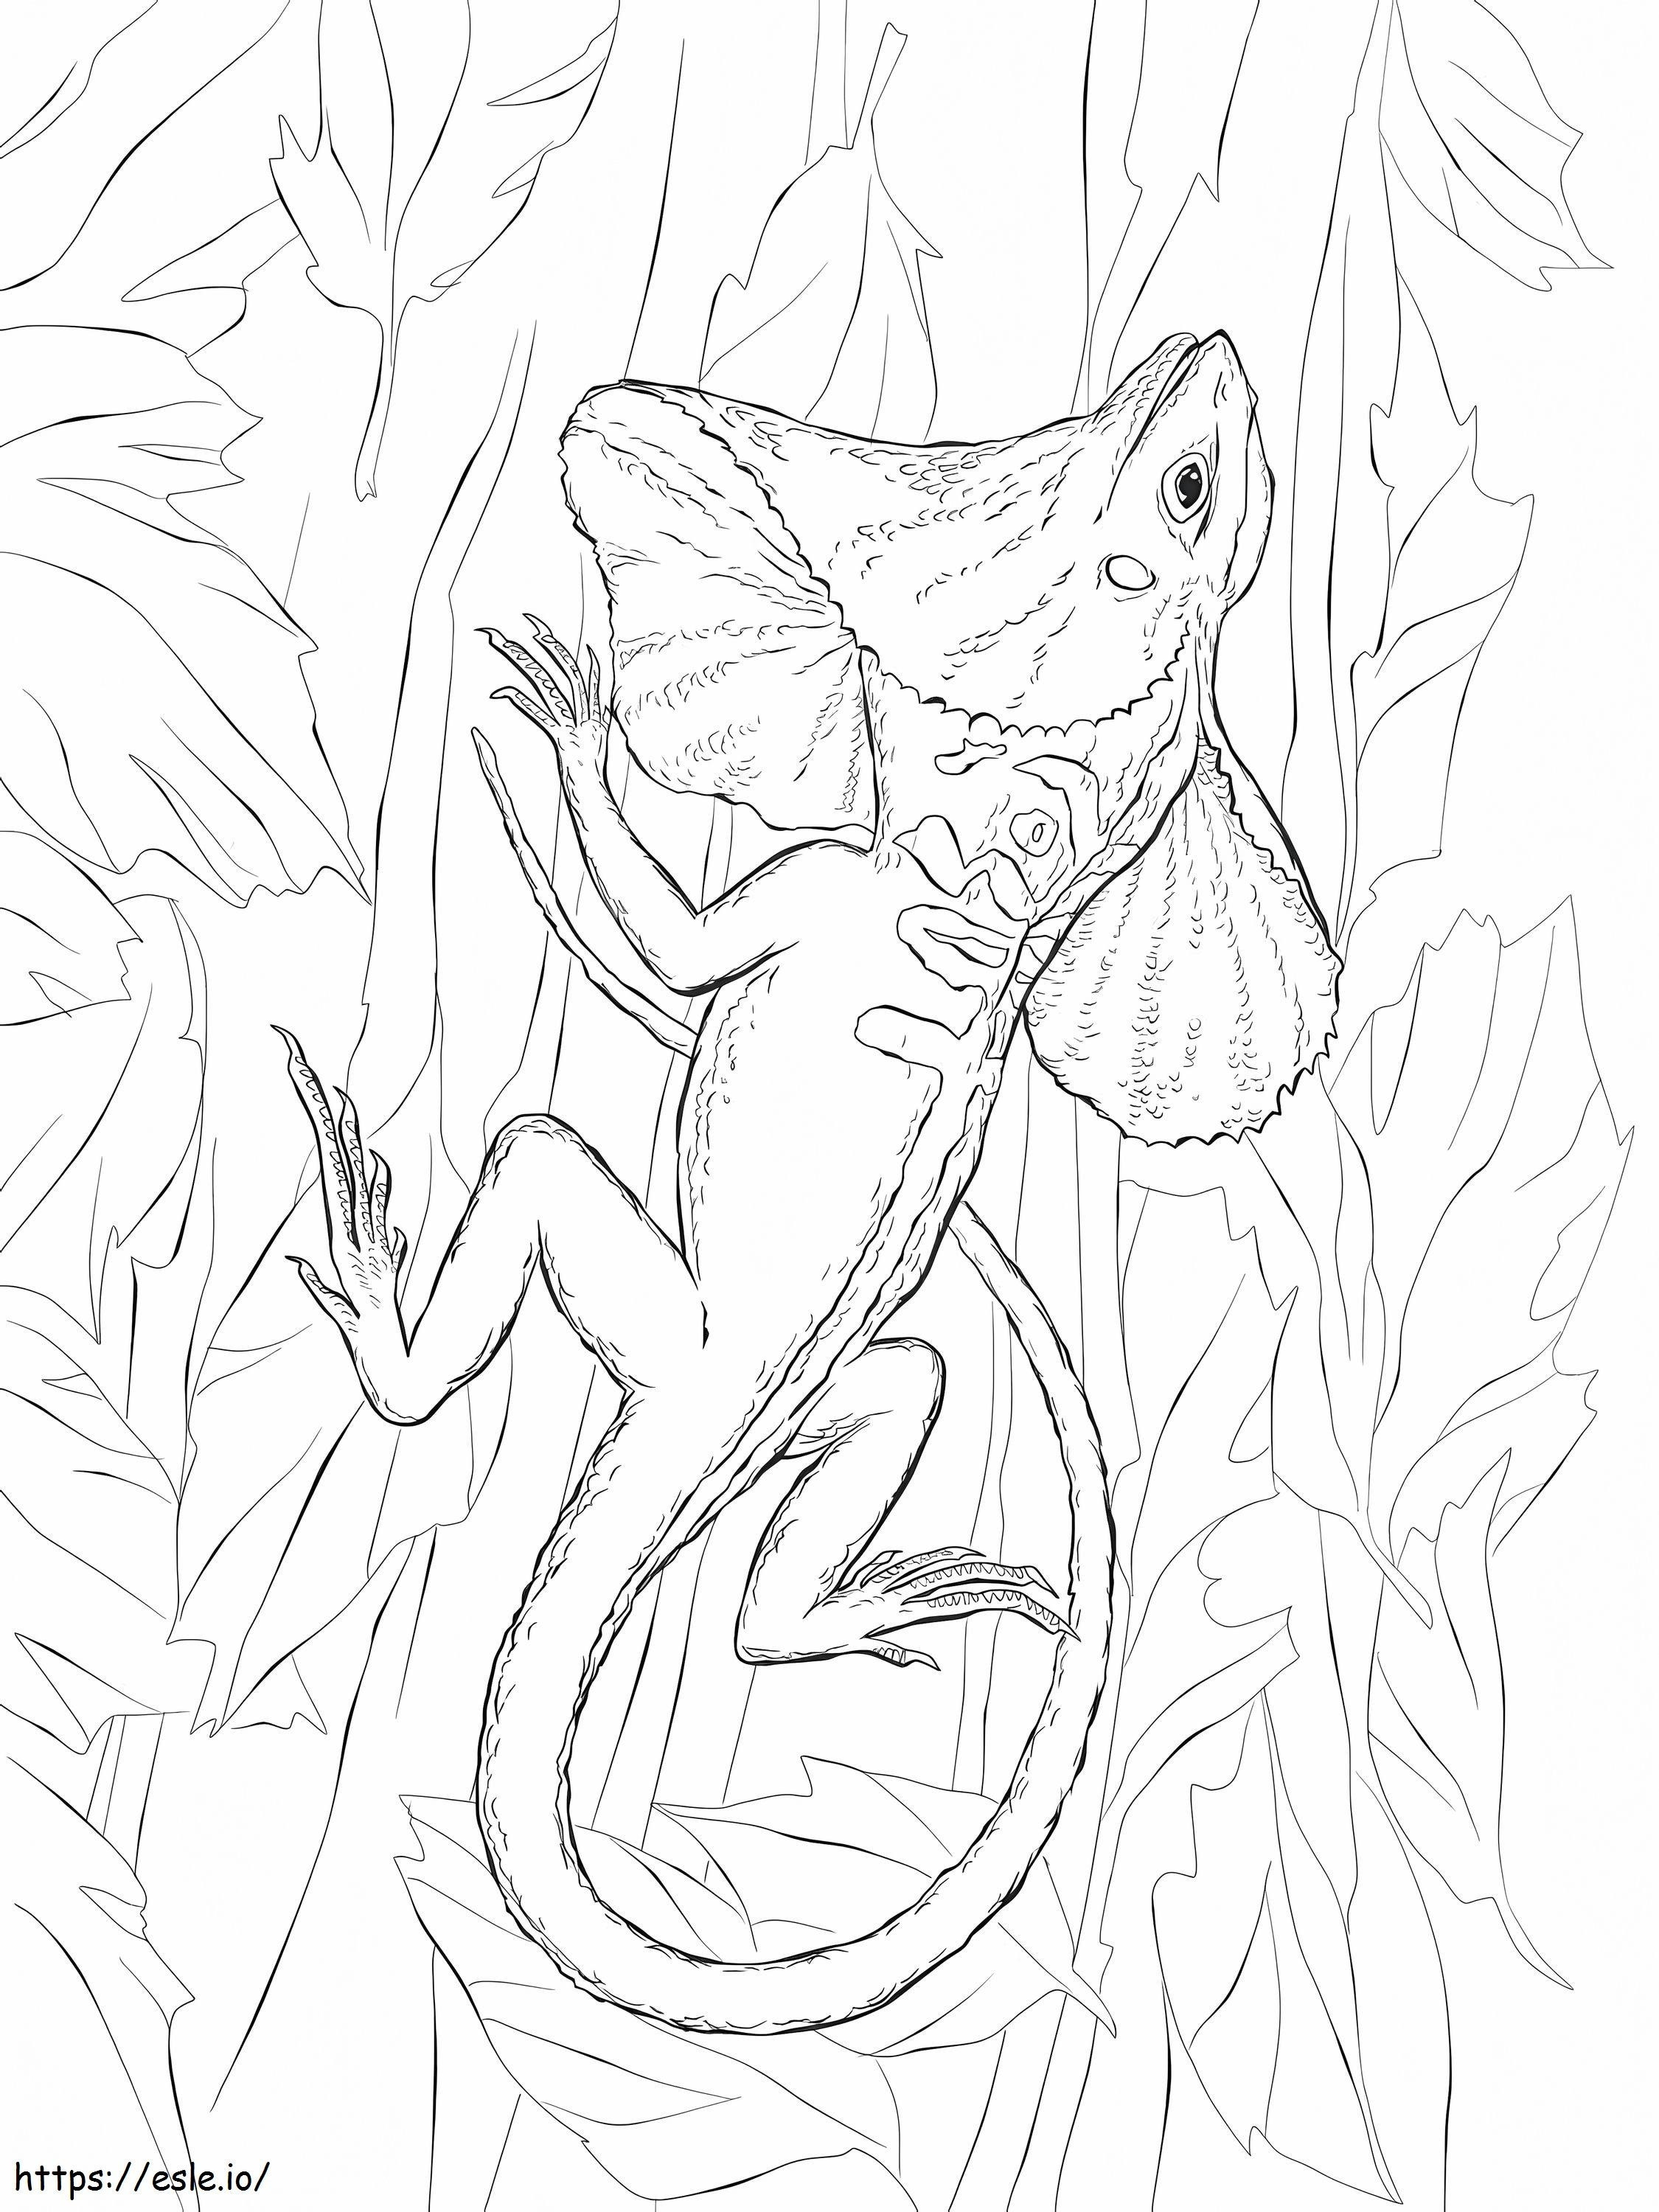 Ruffled Neck Lizard coloring page